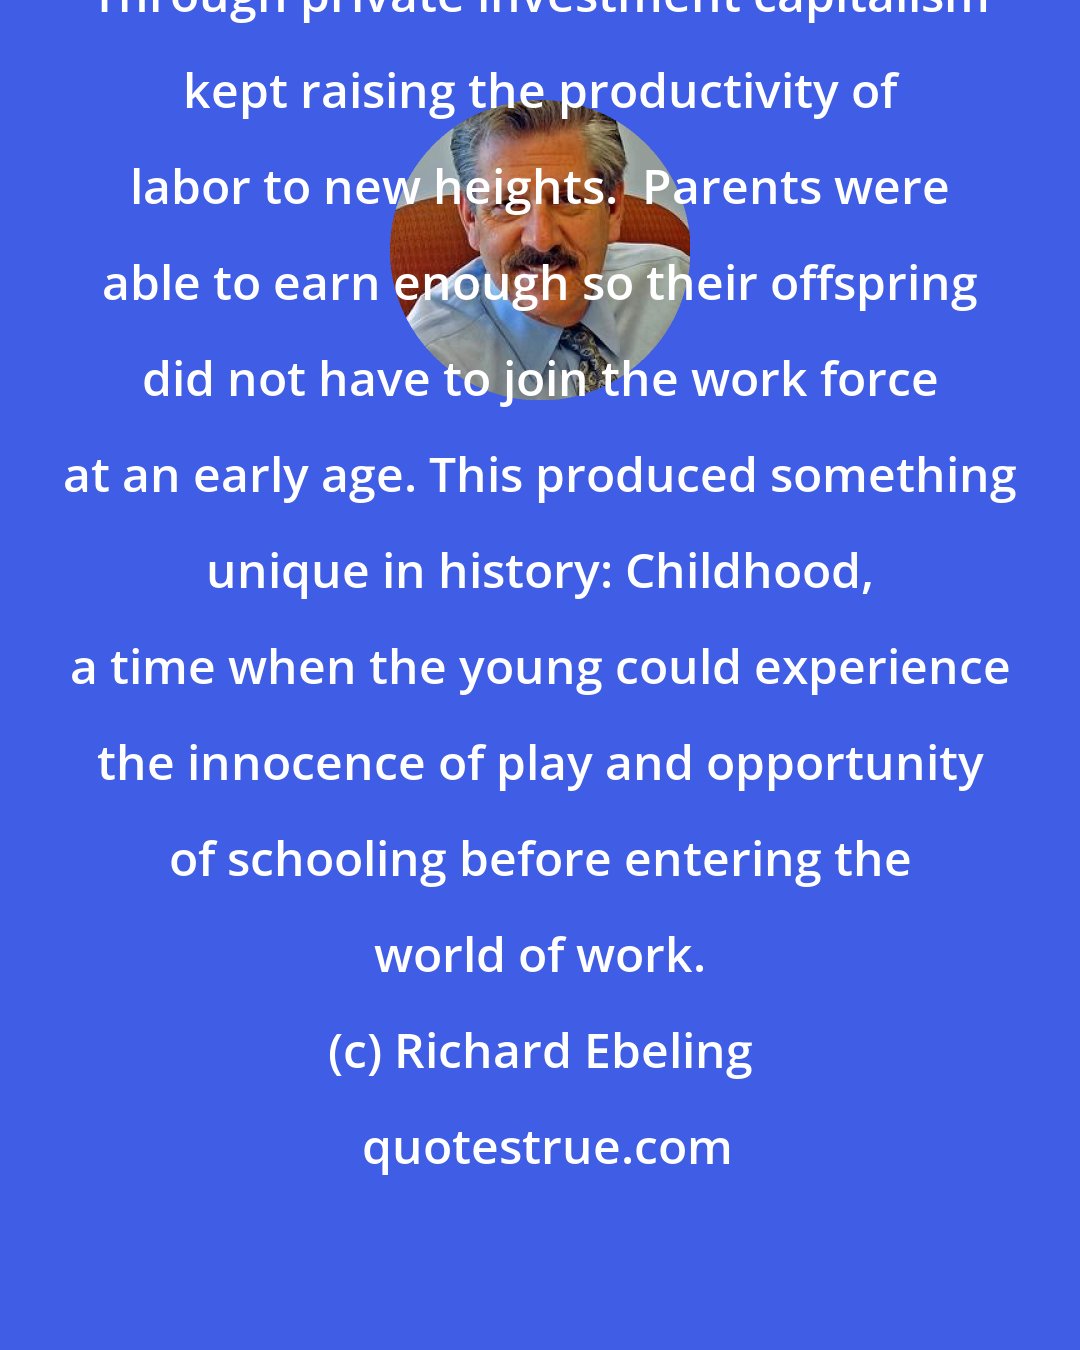 Richard Ebeling: Through private investment capitalism kept raising the productivity of labor to new heights.  Parents were able to earn enough so their offspring did not have to join the work force at an early age. This produced something unique in history: Childhood, a time when the young could experience the innocence of play and opportunity of schooling before entering the world of work.